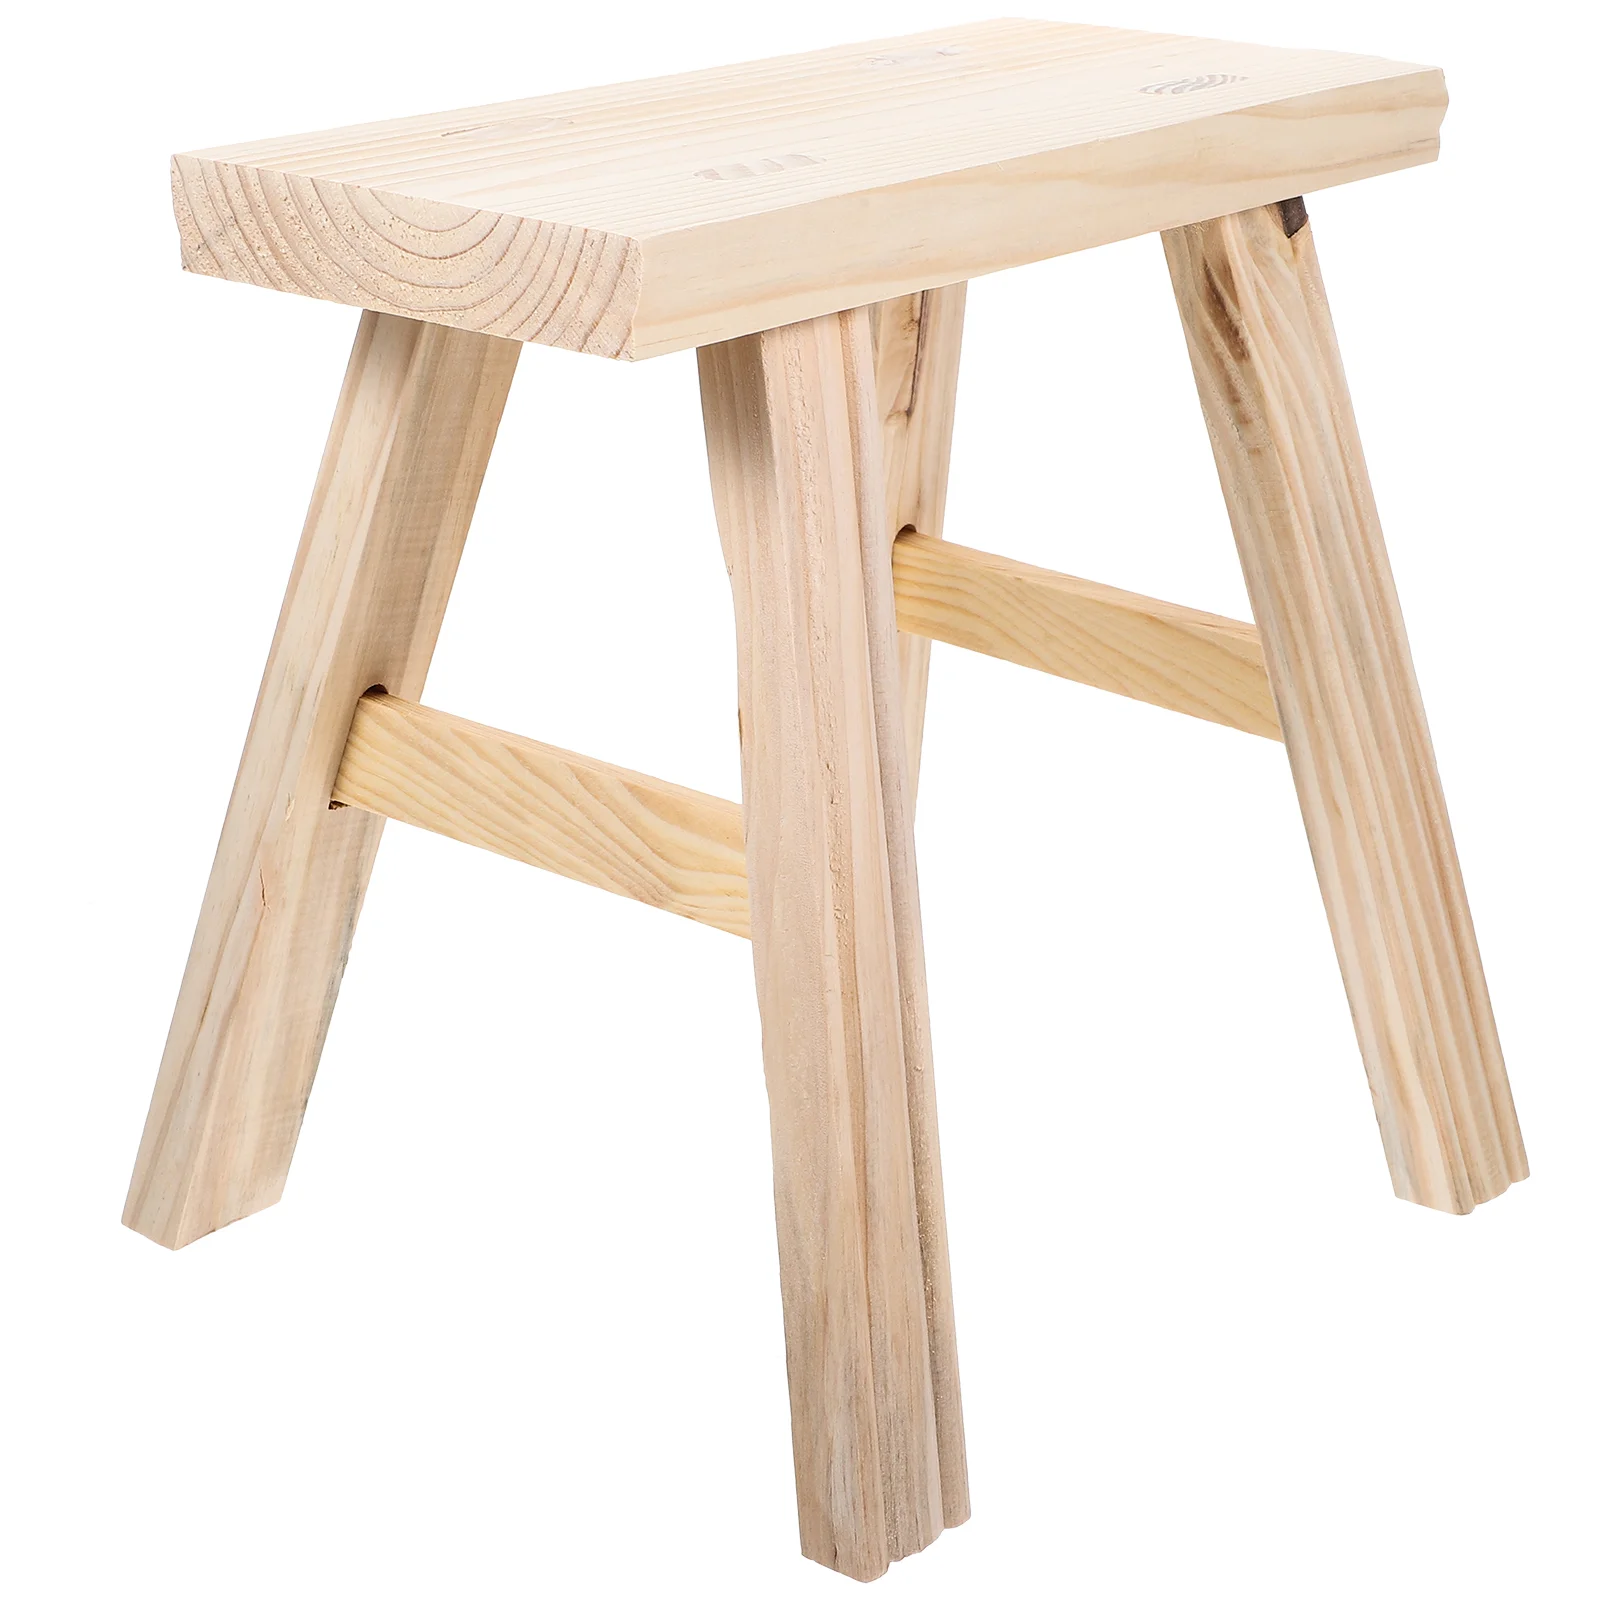 

Small Wooden Stool Toddler Bench Bathroom Stools Plant Stands Indoor Short Step Sitting Kitchen Tray